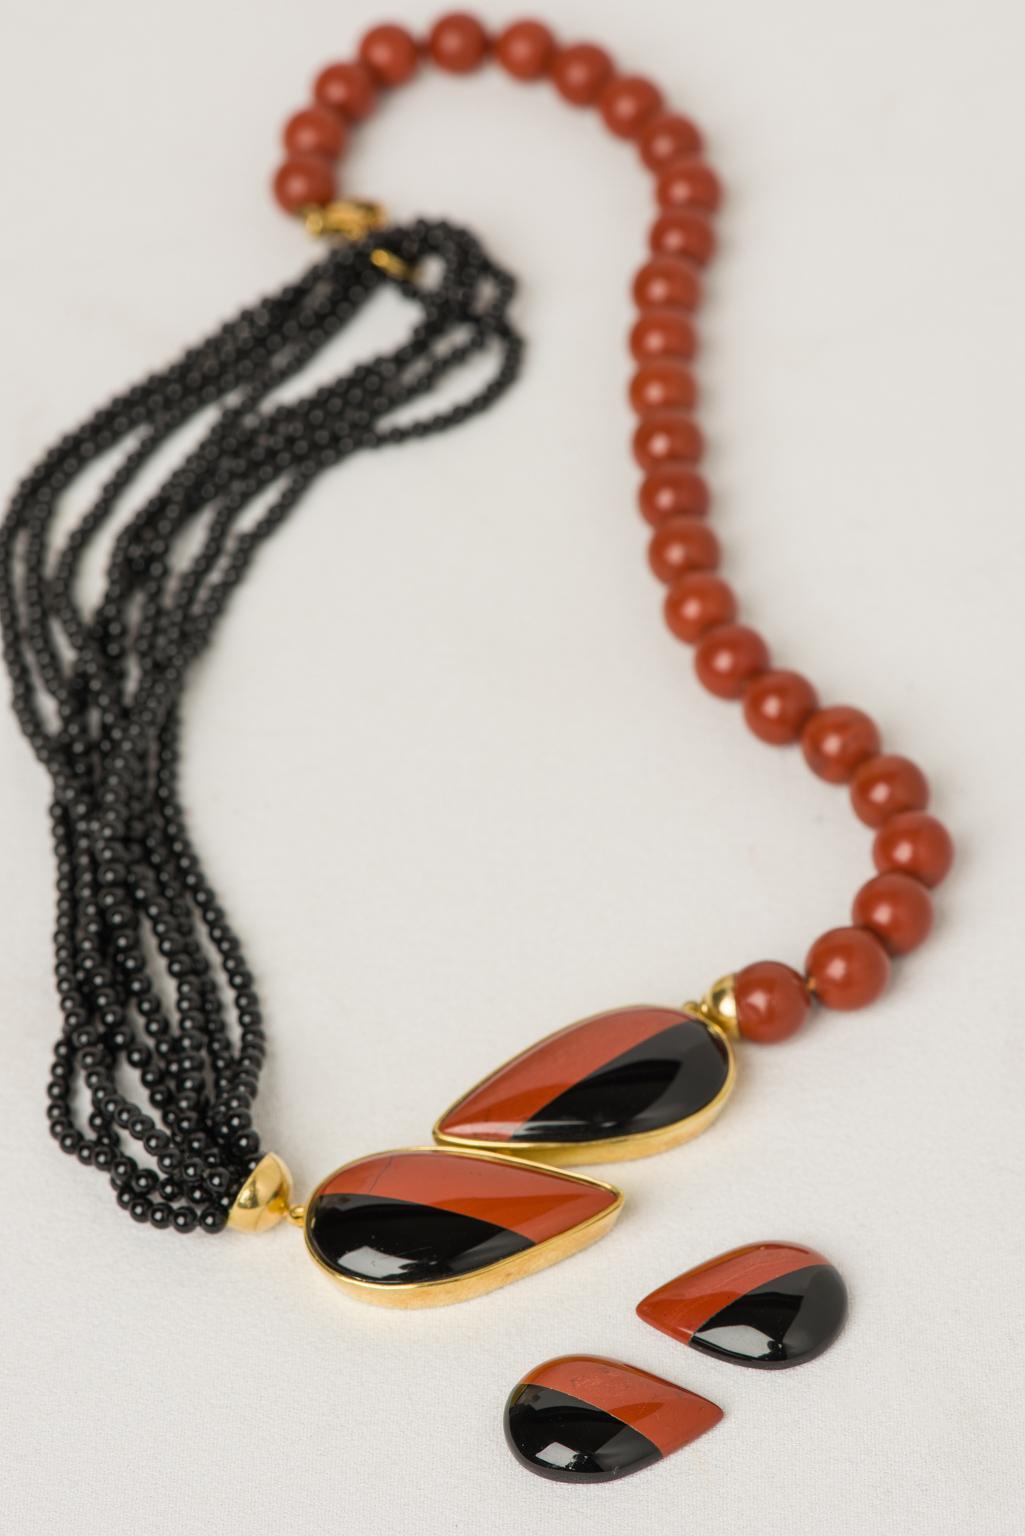 Agate Necklace in Black Agata and Red Jasper on Gold For Sale